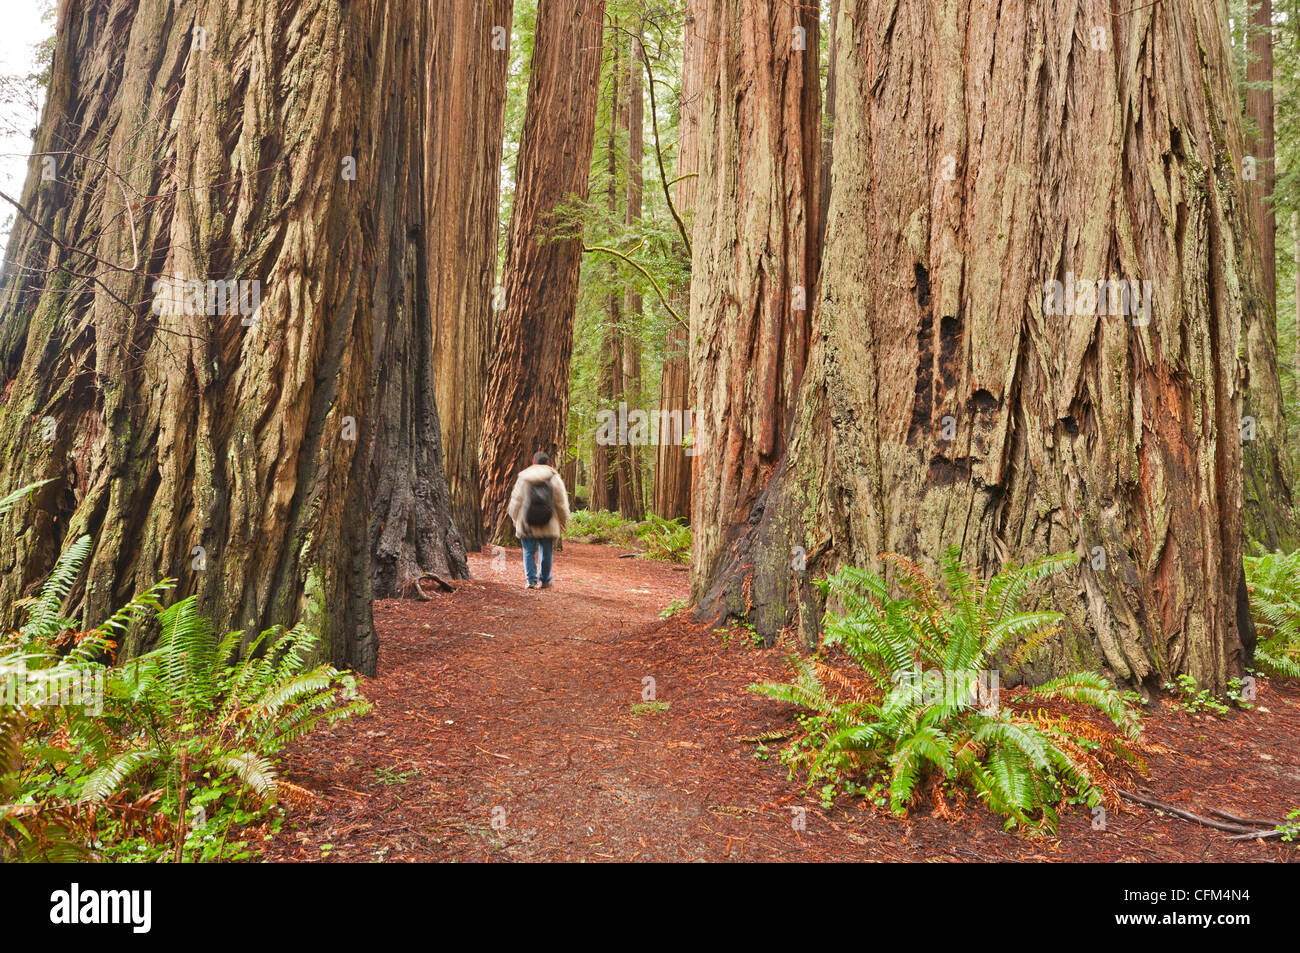 The beautiful and massive giant redwoods, Sequoia sempervirens located in the Jedediah Smith Redwoods State Park in California. Stock Photo